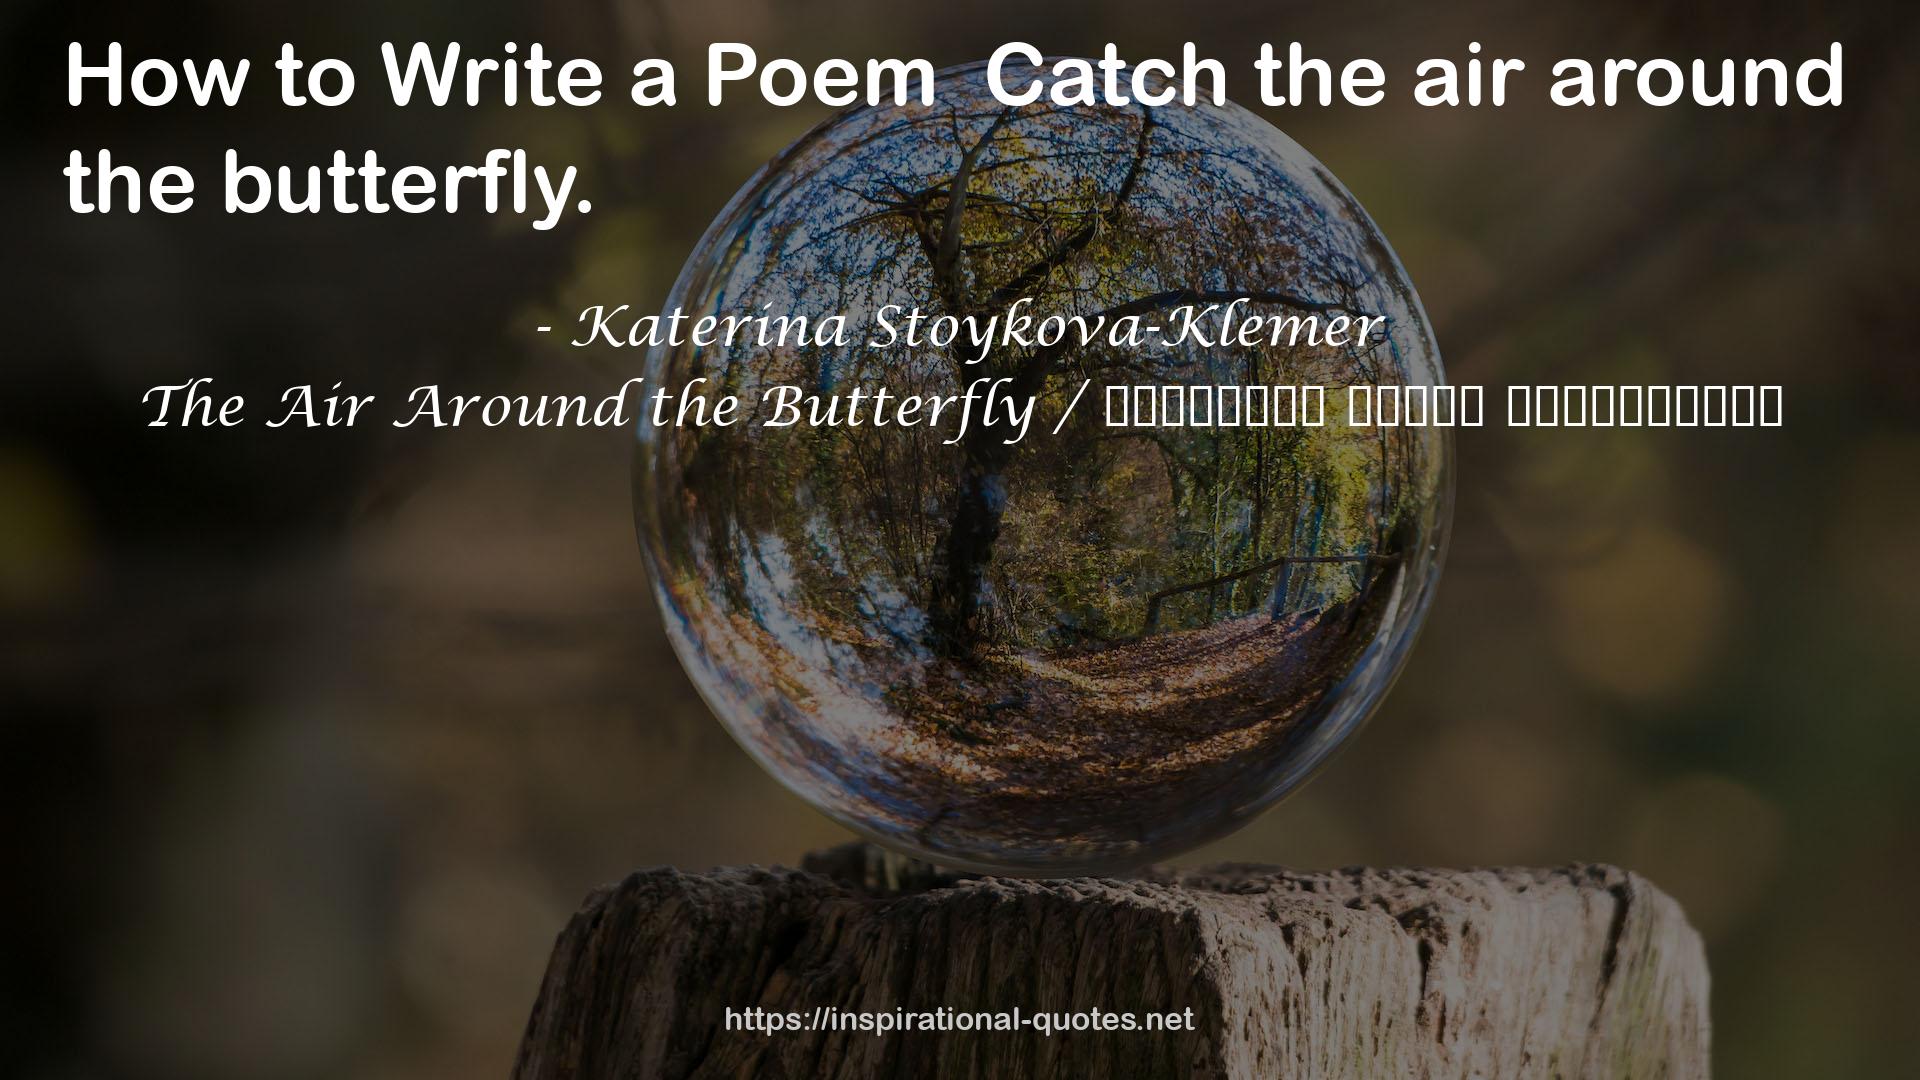 The Air Around the Butterfly / Въздухът около пеперудата QUOTES